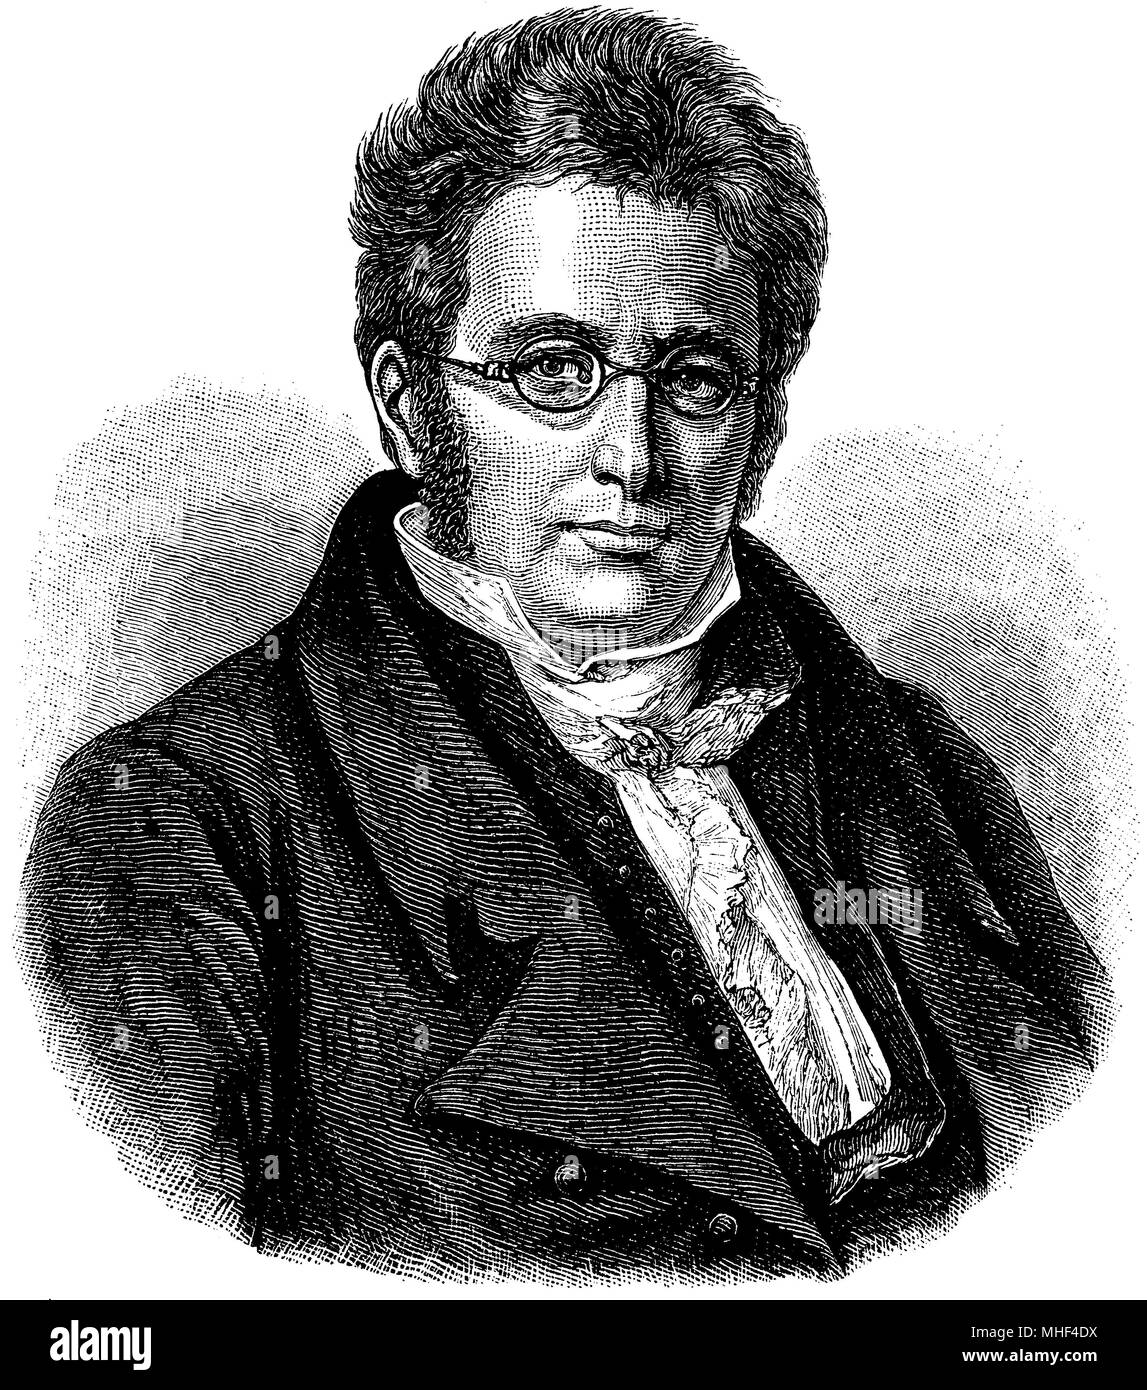 Augustin De Candolle (born February 4, 1778, died September 9, 1841), Stock Photo